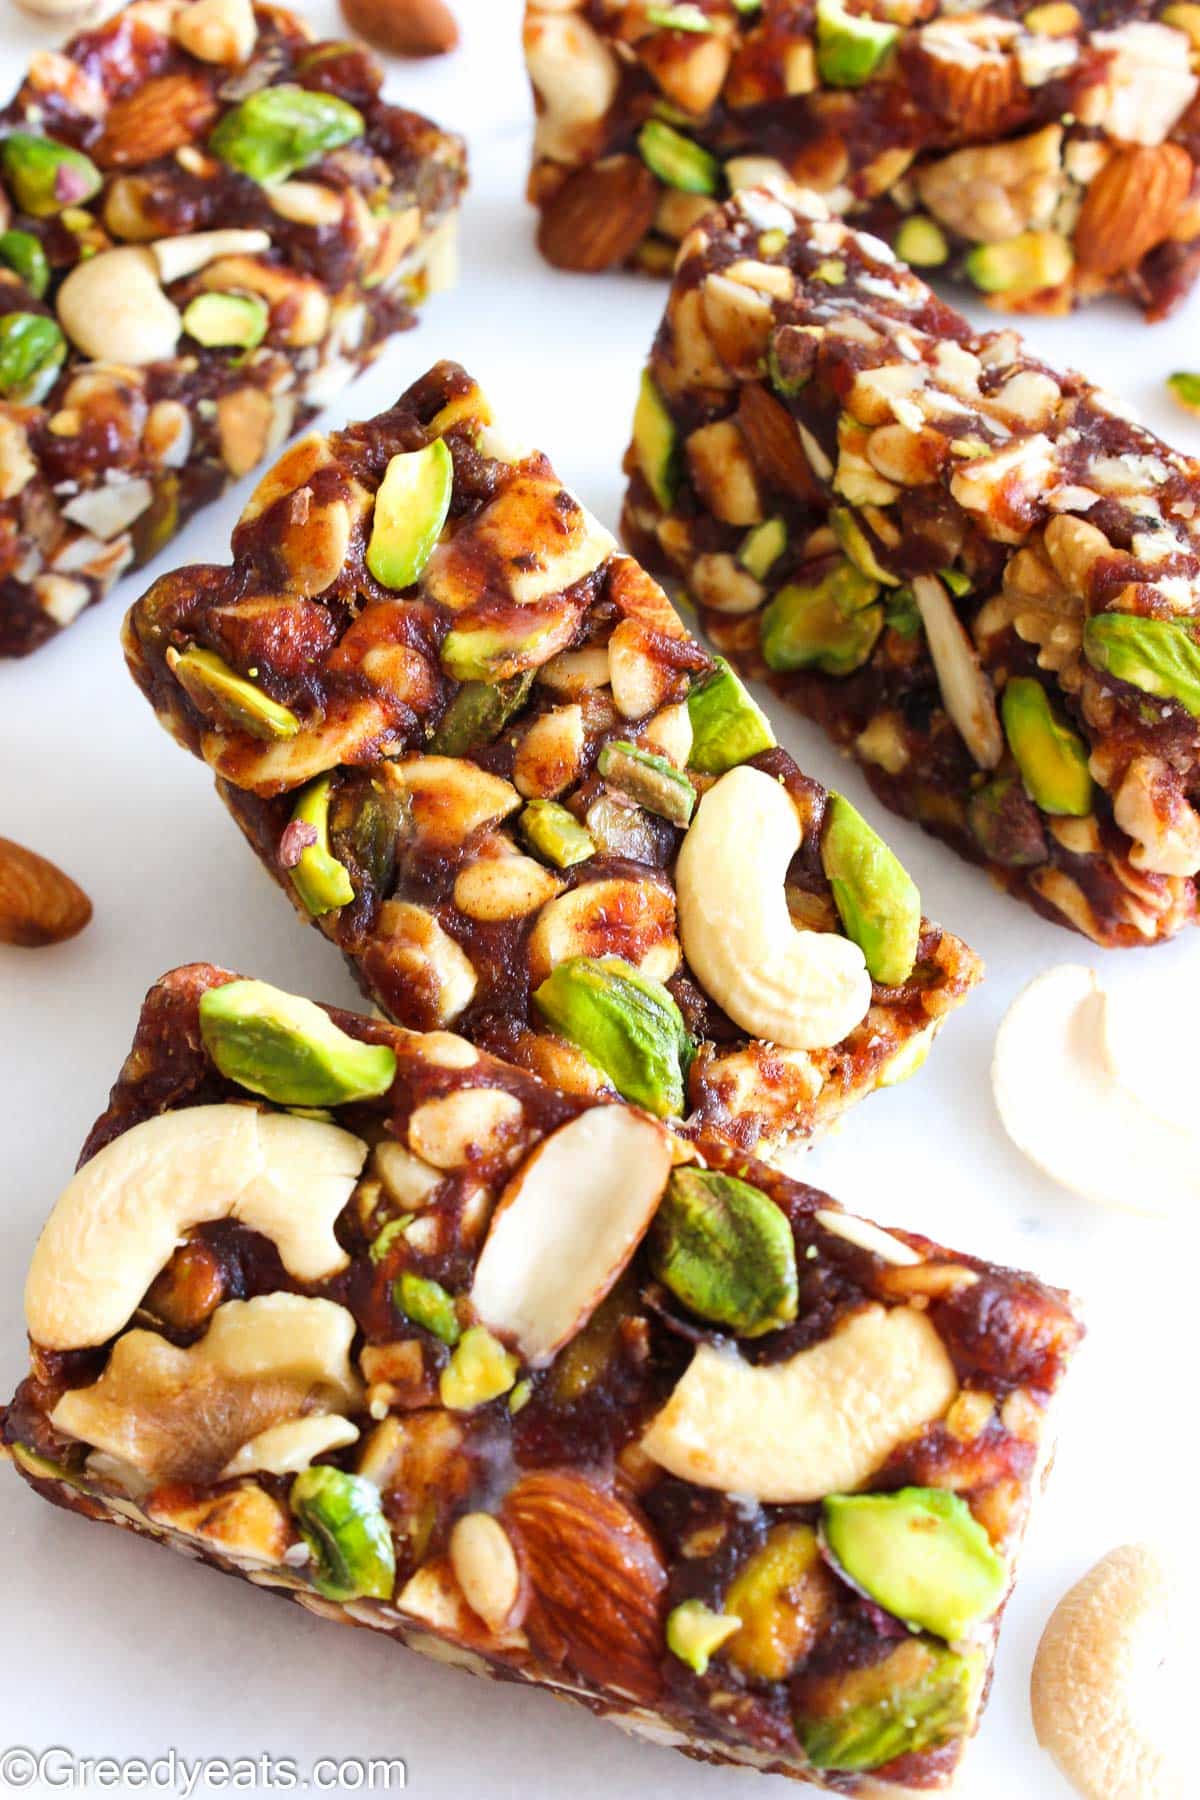 No bake and Healthy Date Bars are loaded with nutrients and are naturally sweetened with dates.